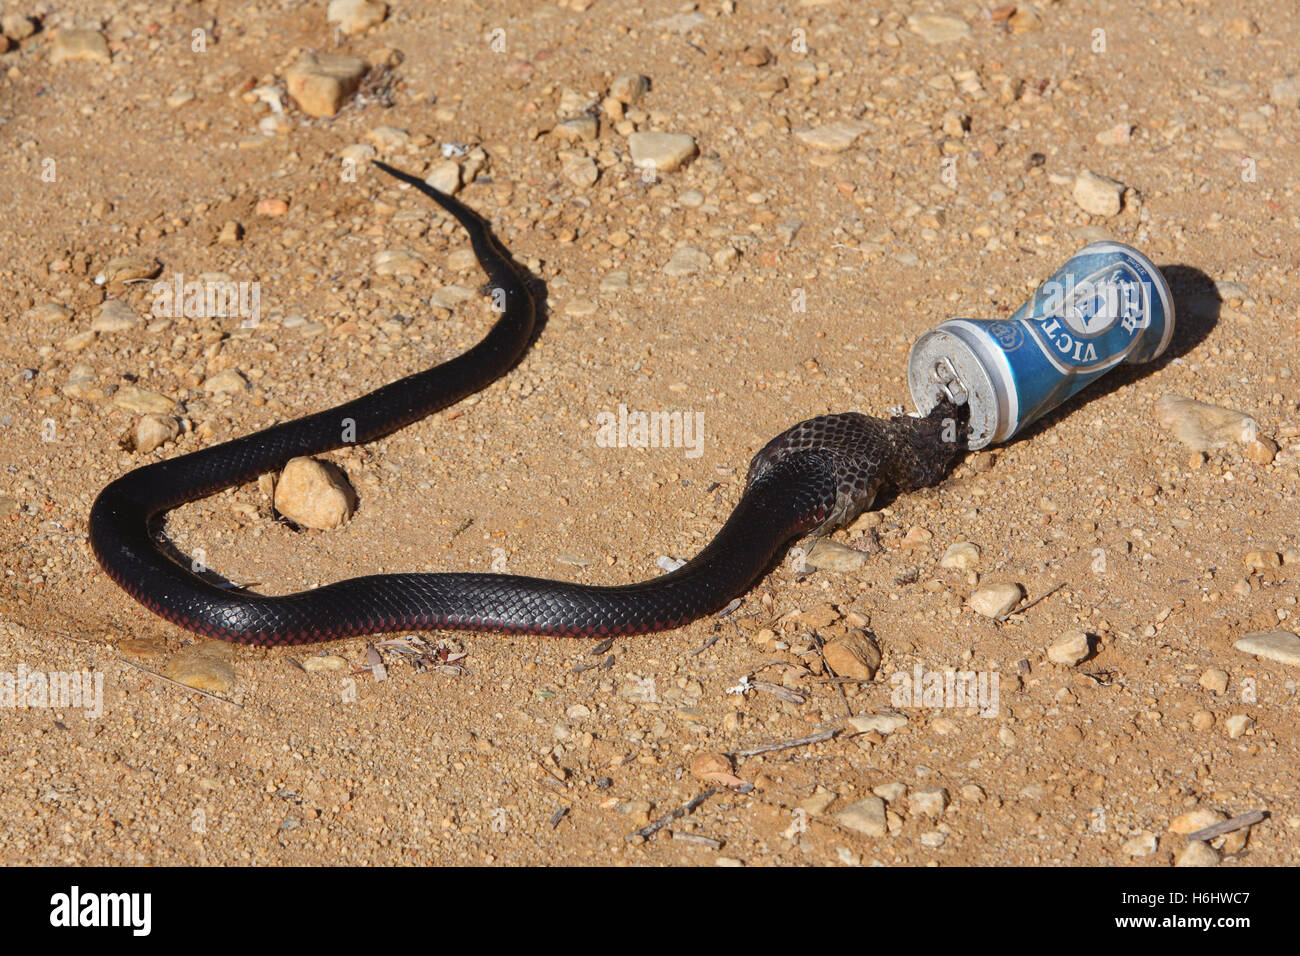 red-bellied-black-snake-killed-after-being-stuck-in-a-beer-can-victoria-H6HWC7.jpg